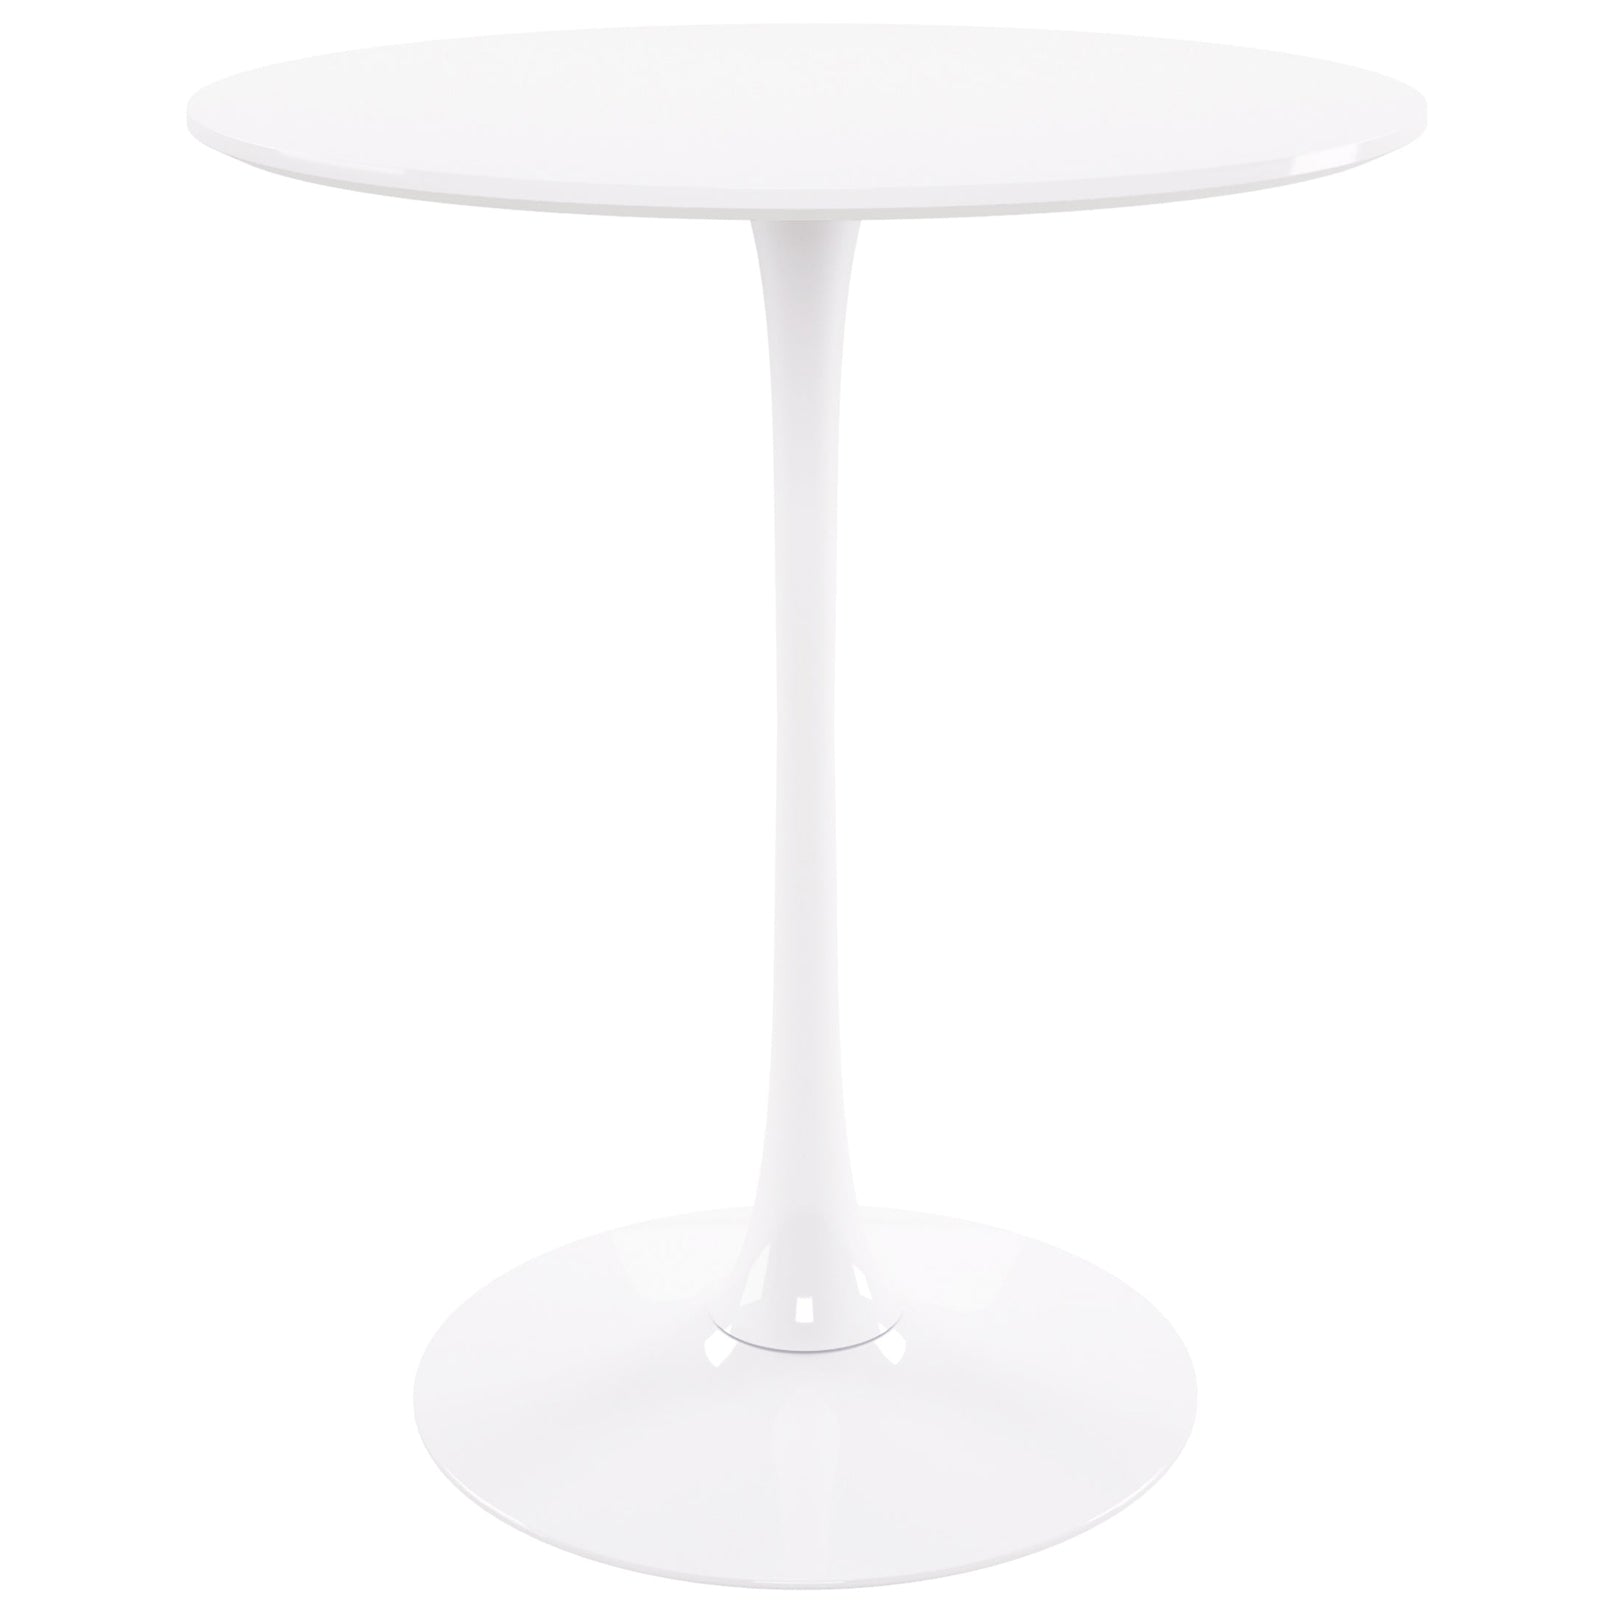 Tulip Wood Top Bar Table, 35.5" Round